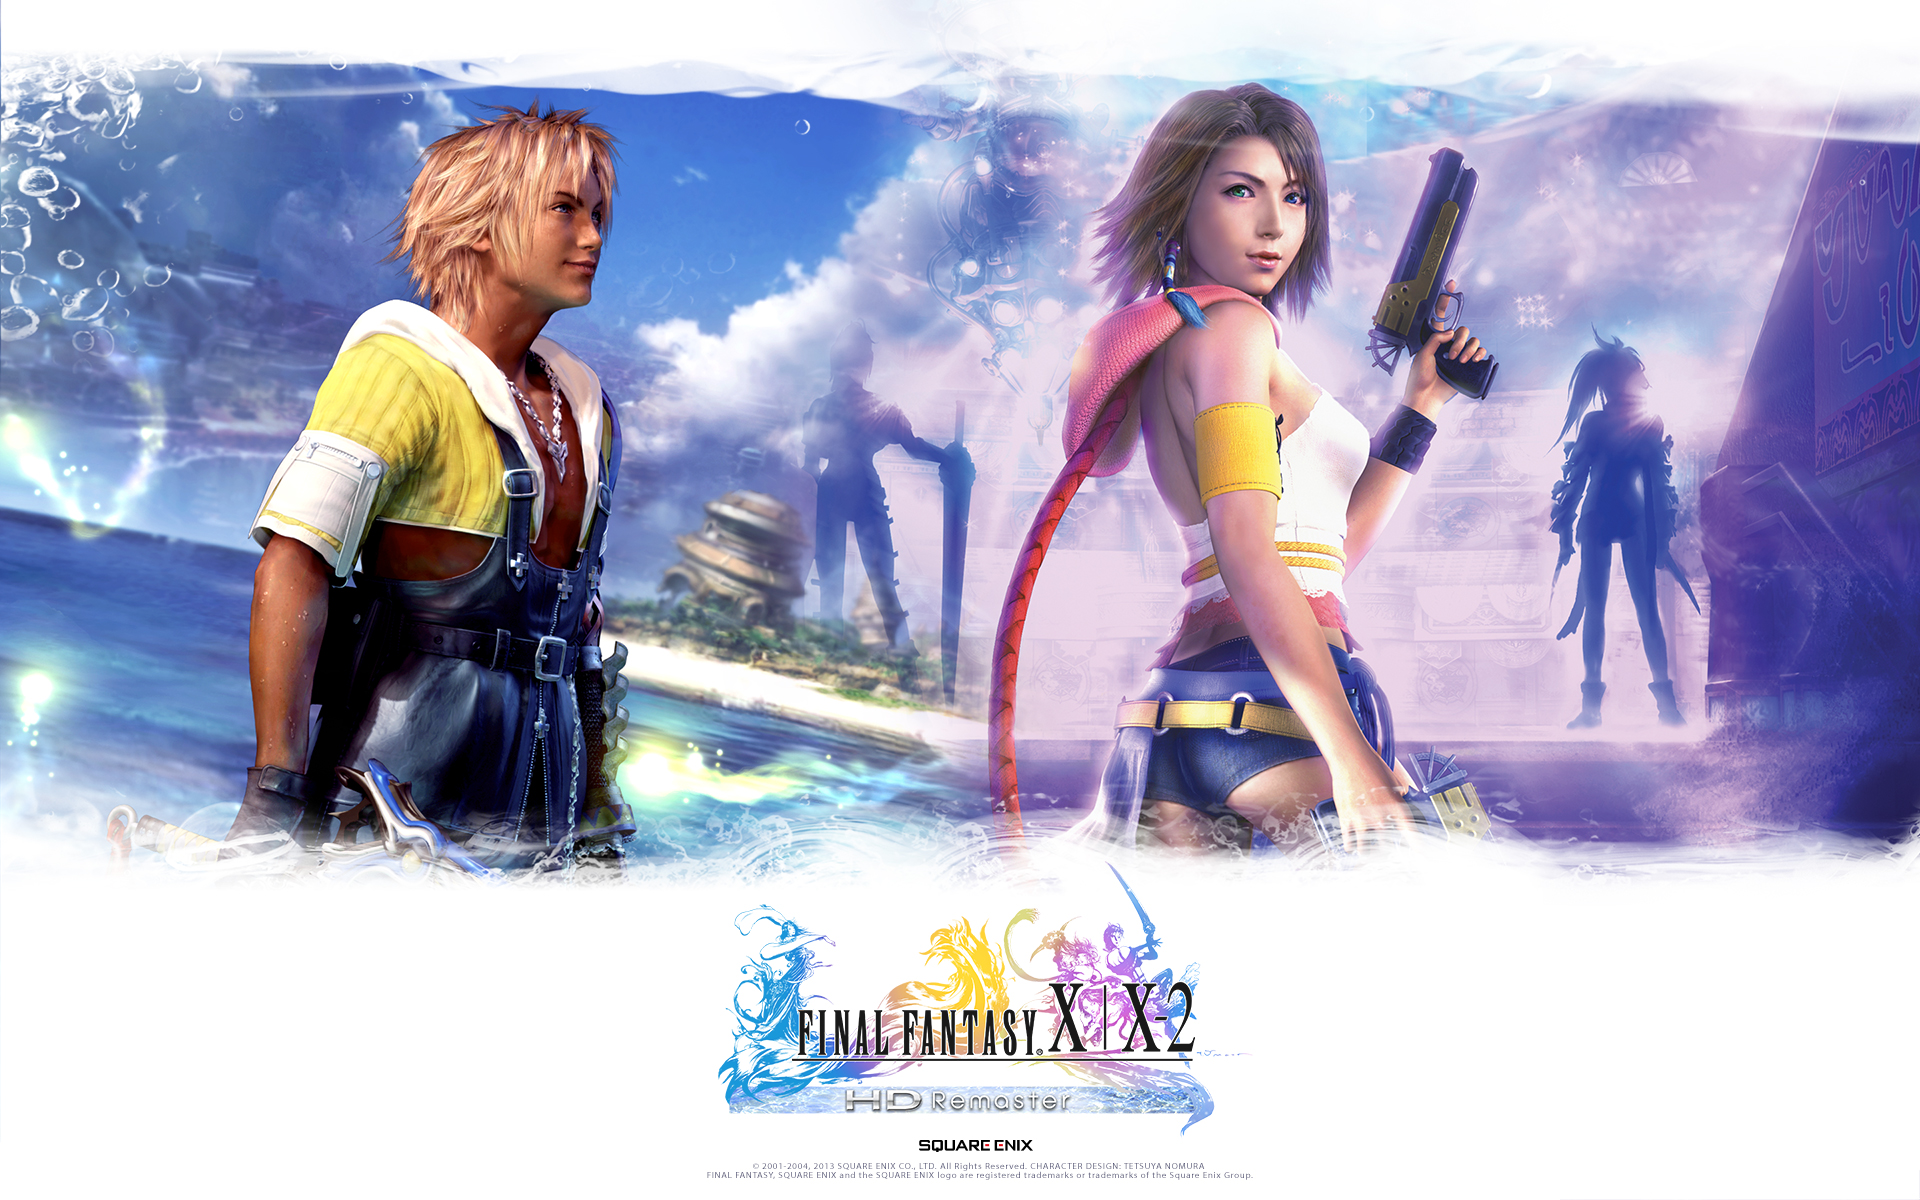 Final Fantasy XX 2 HD Remaster Wallpapers   The Final Fantasy Wiki 1920x1200